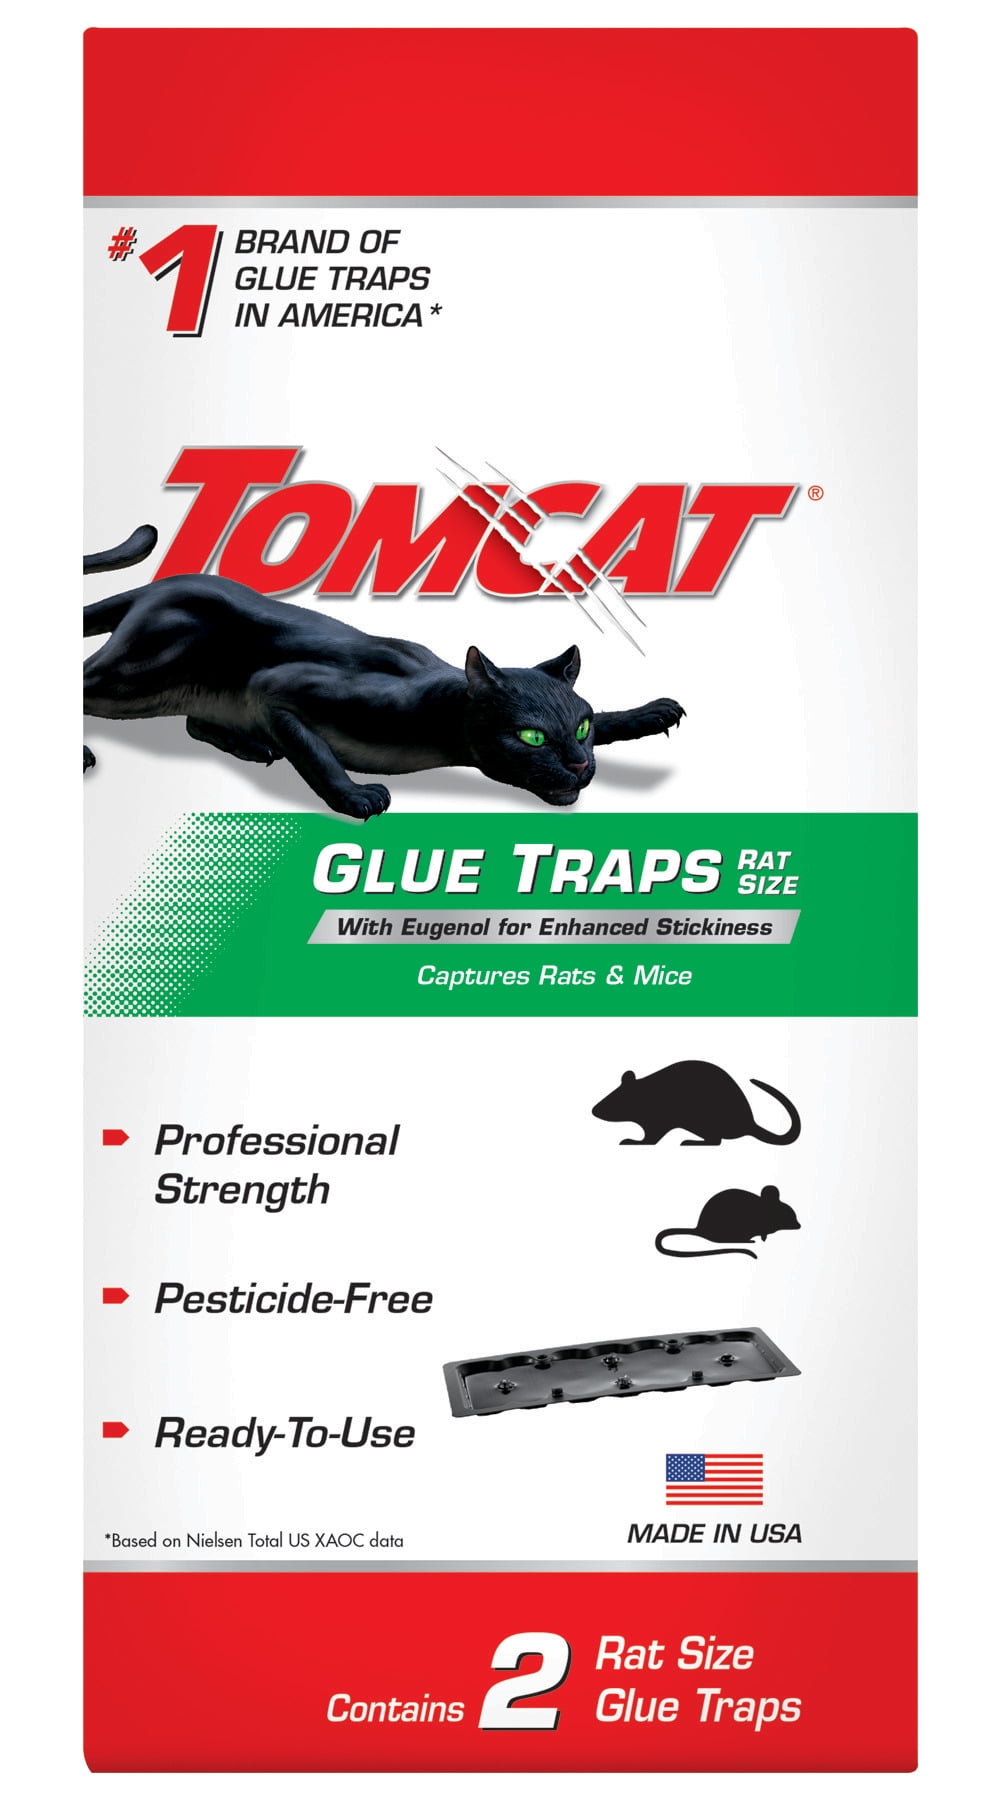 Tomcat® Glue Traps Mouse Size with Eugenol for Enhanced Stickiness